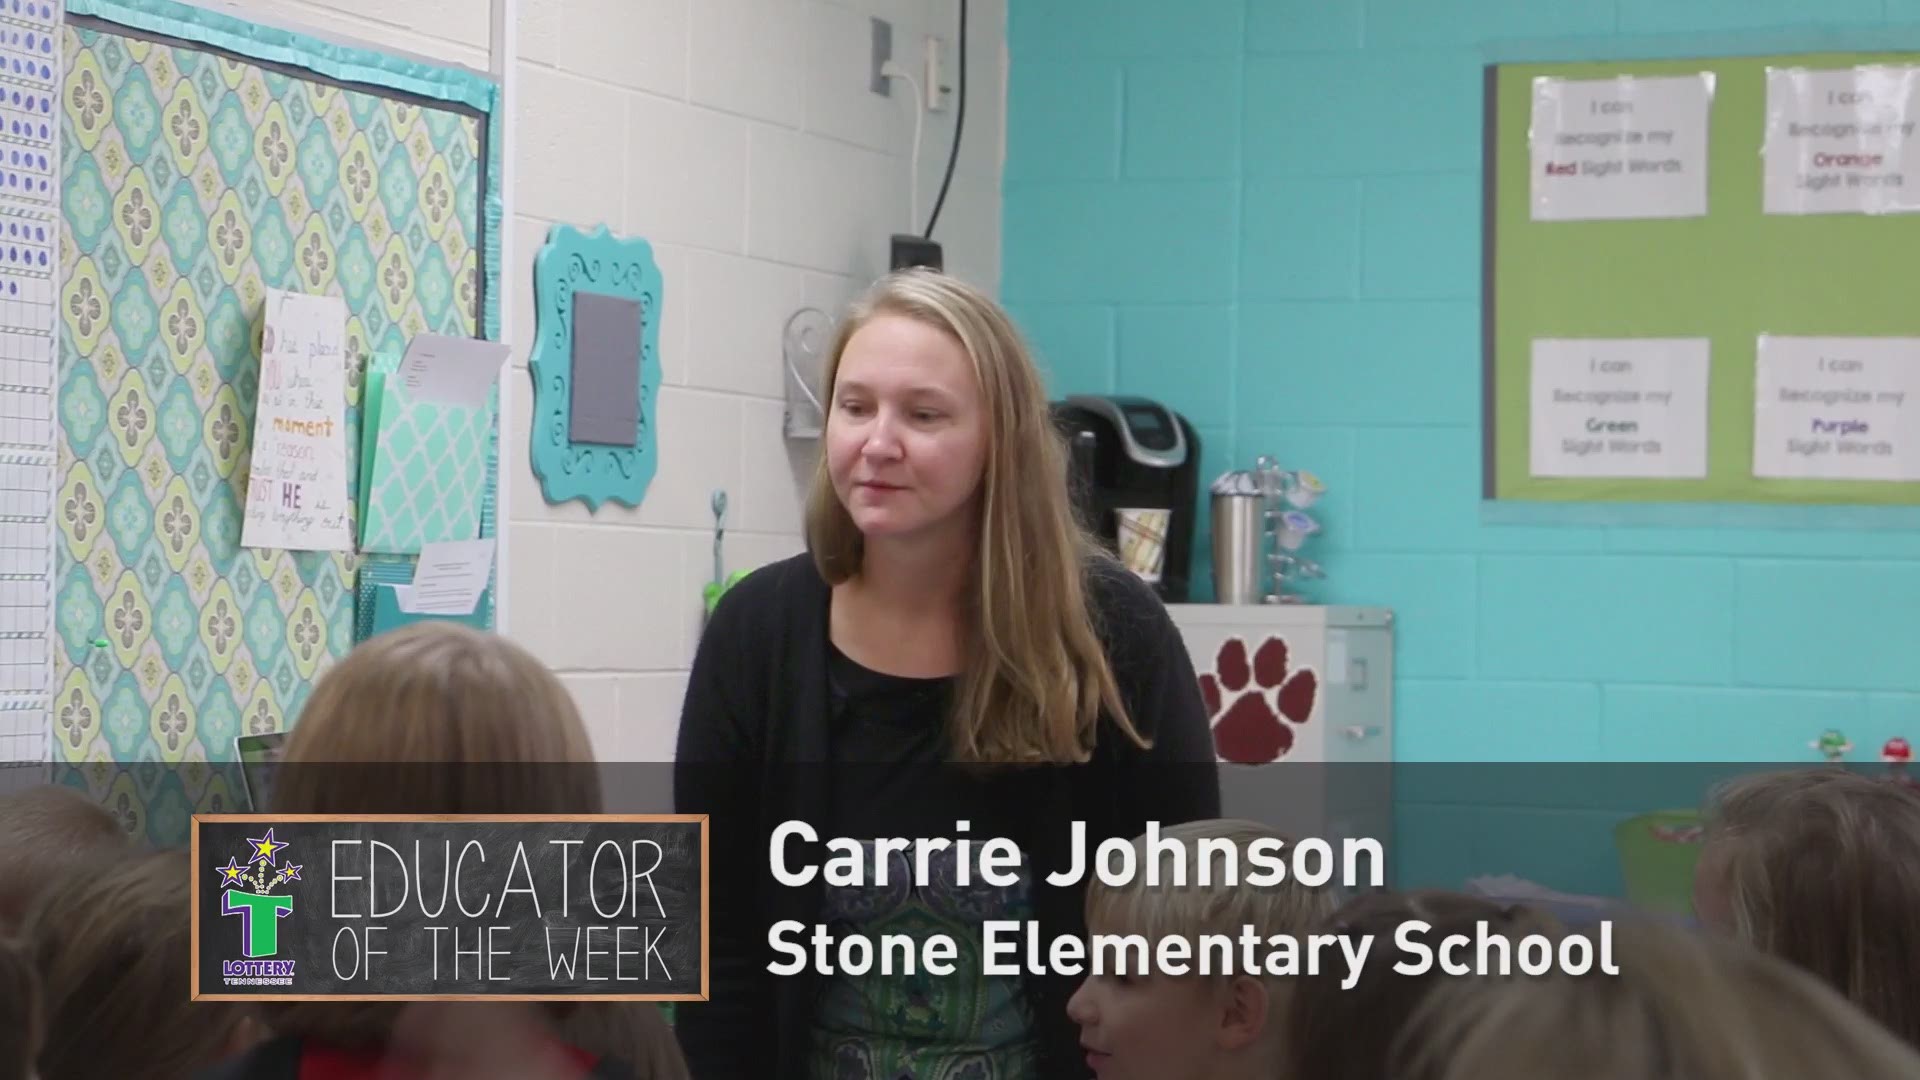 The Educator of the Week 10/31 is Carrie Johnson.